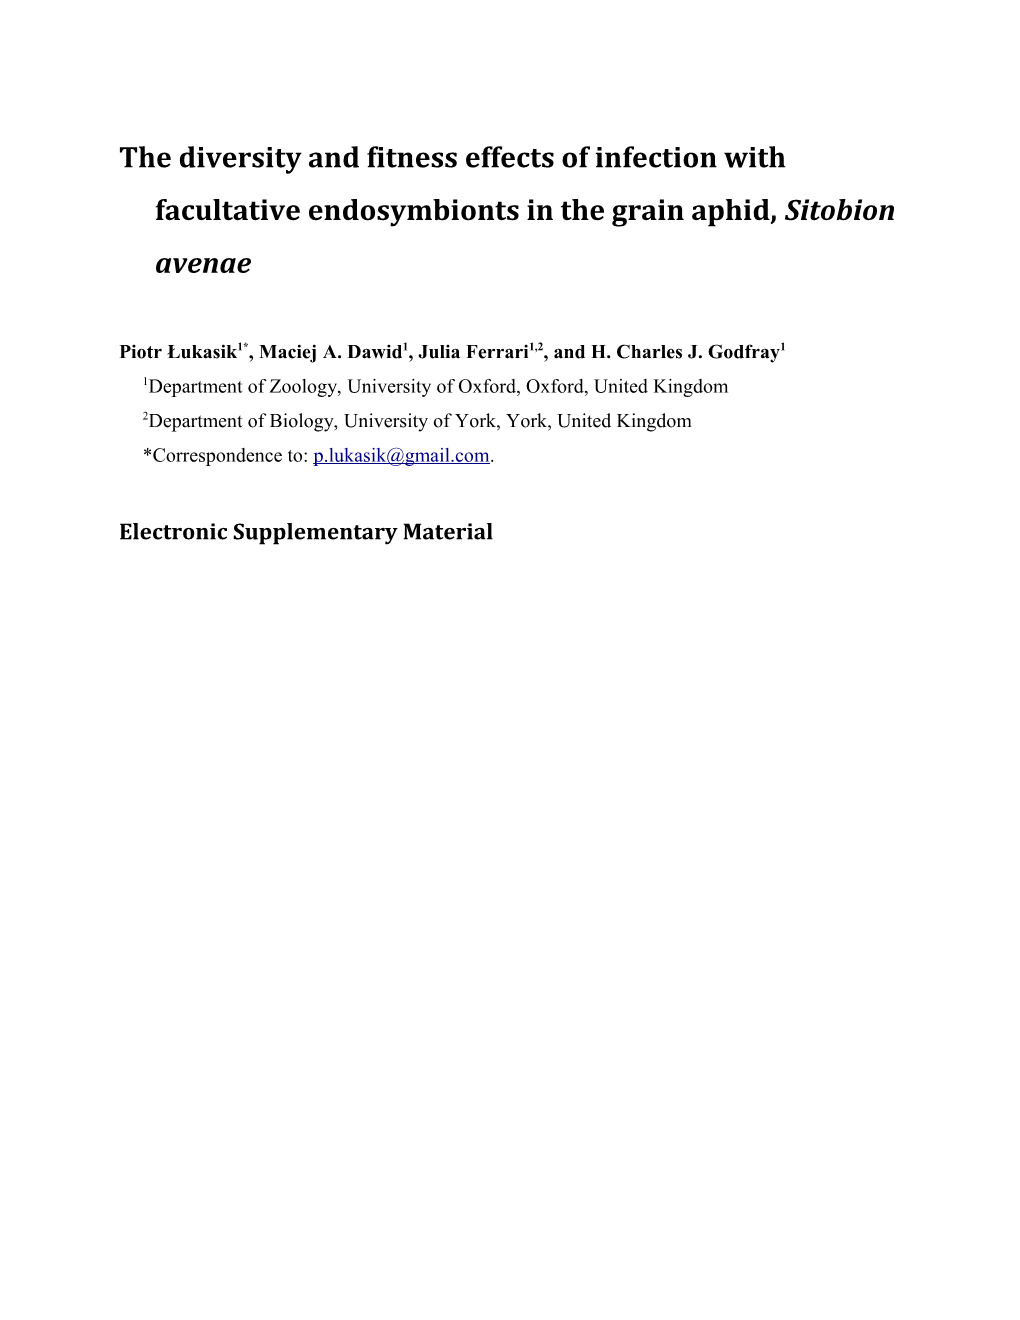 The Diversity and Fitness Effects of Infection with Facultative Endosymbionts in the Grain